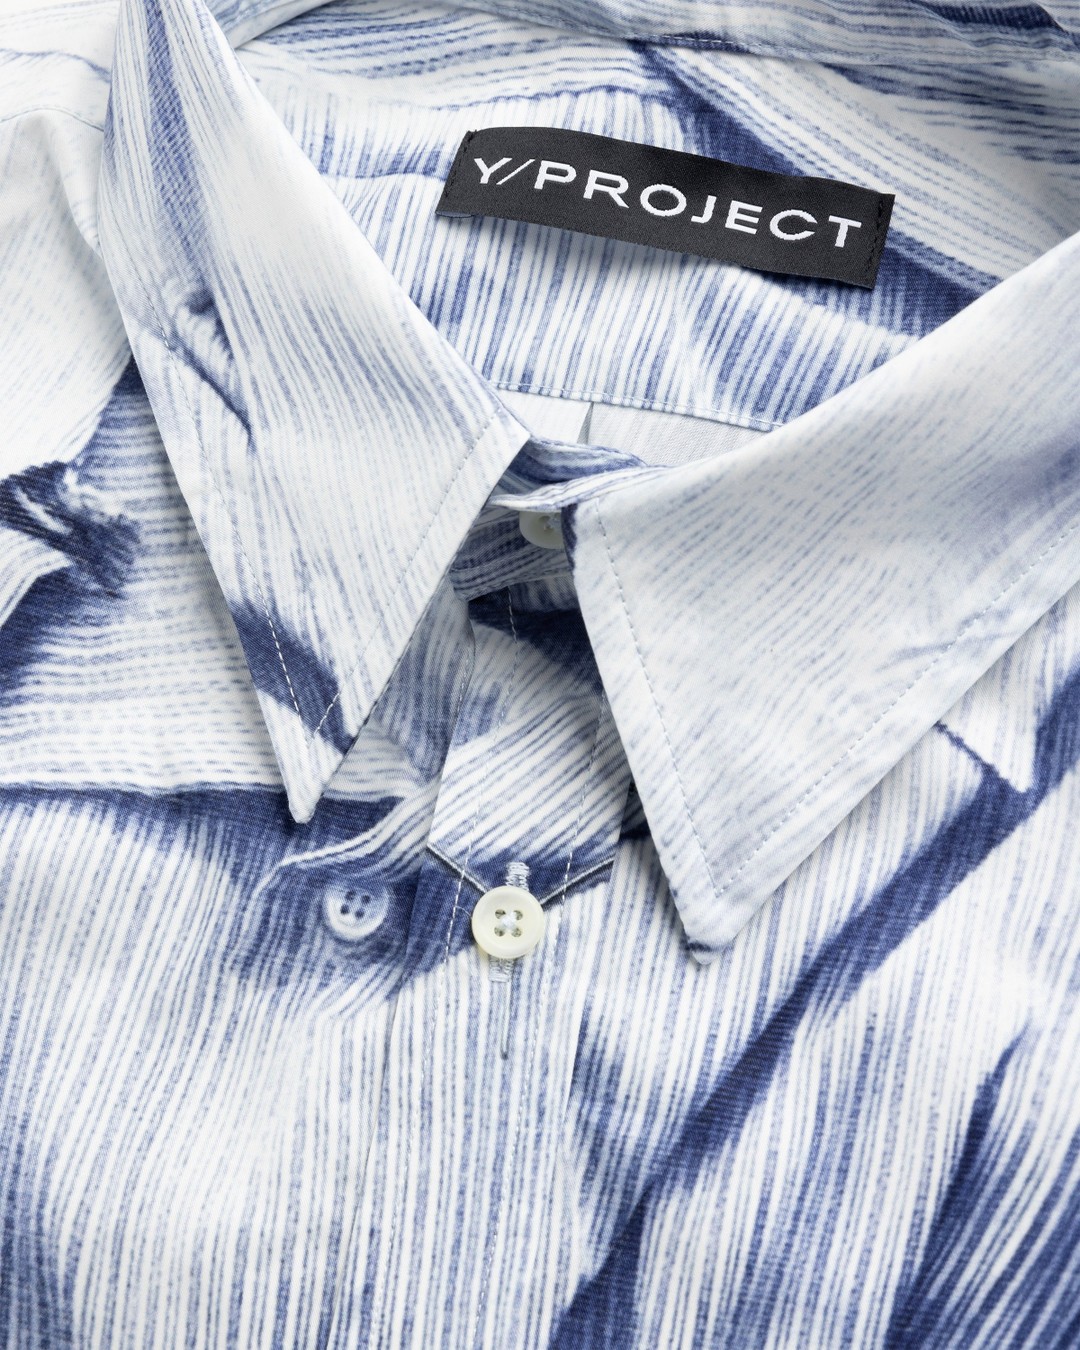 Y/Project – COMPACT PRINT SHIRT | Highsnobiety Shop